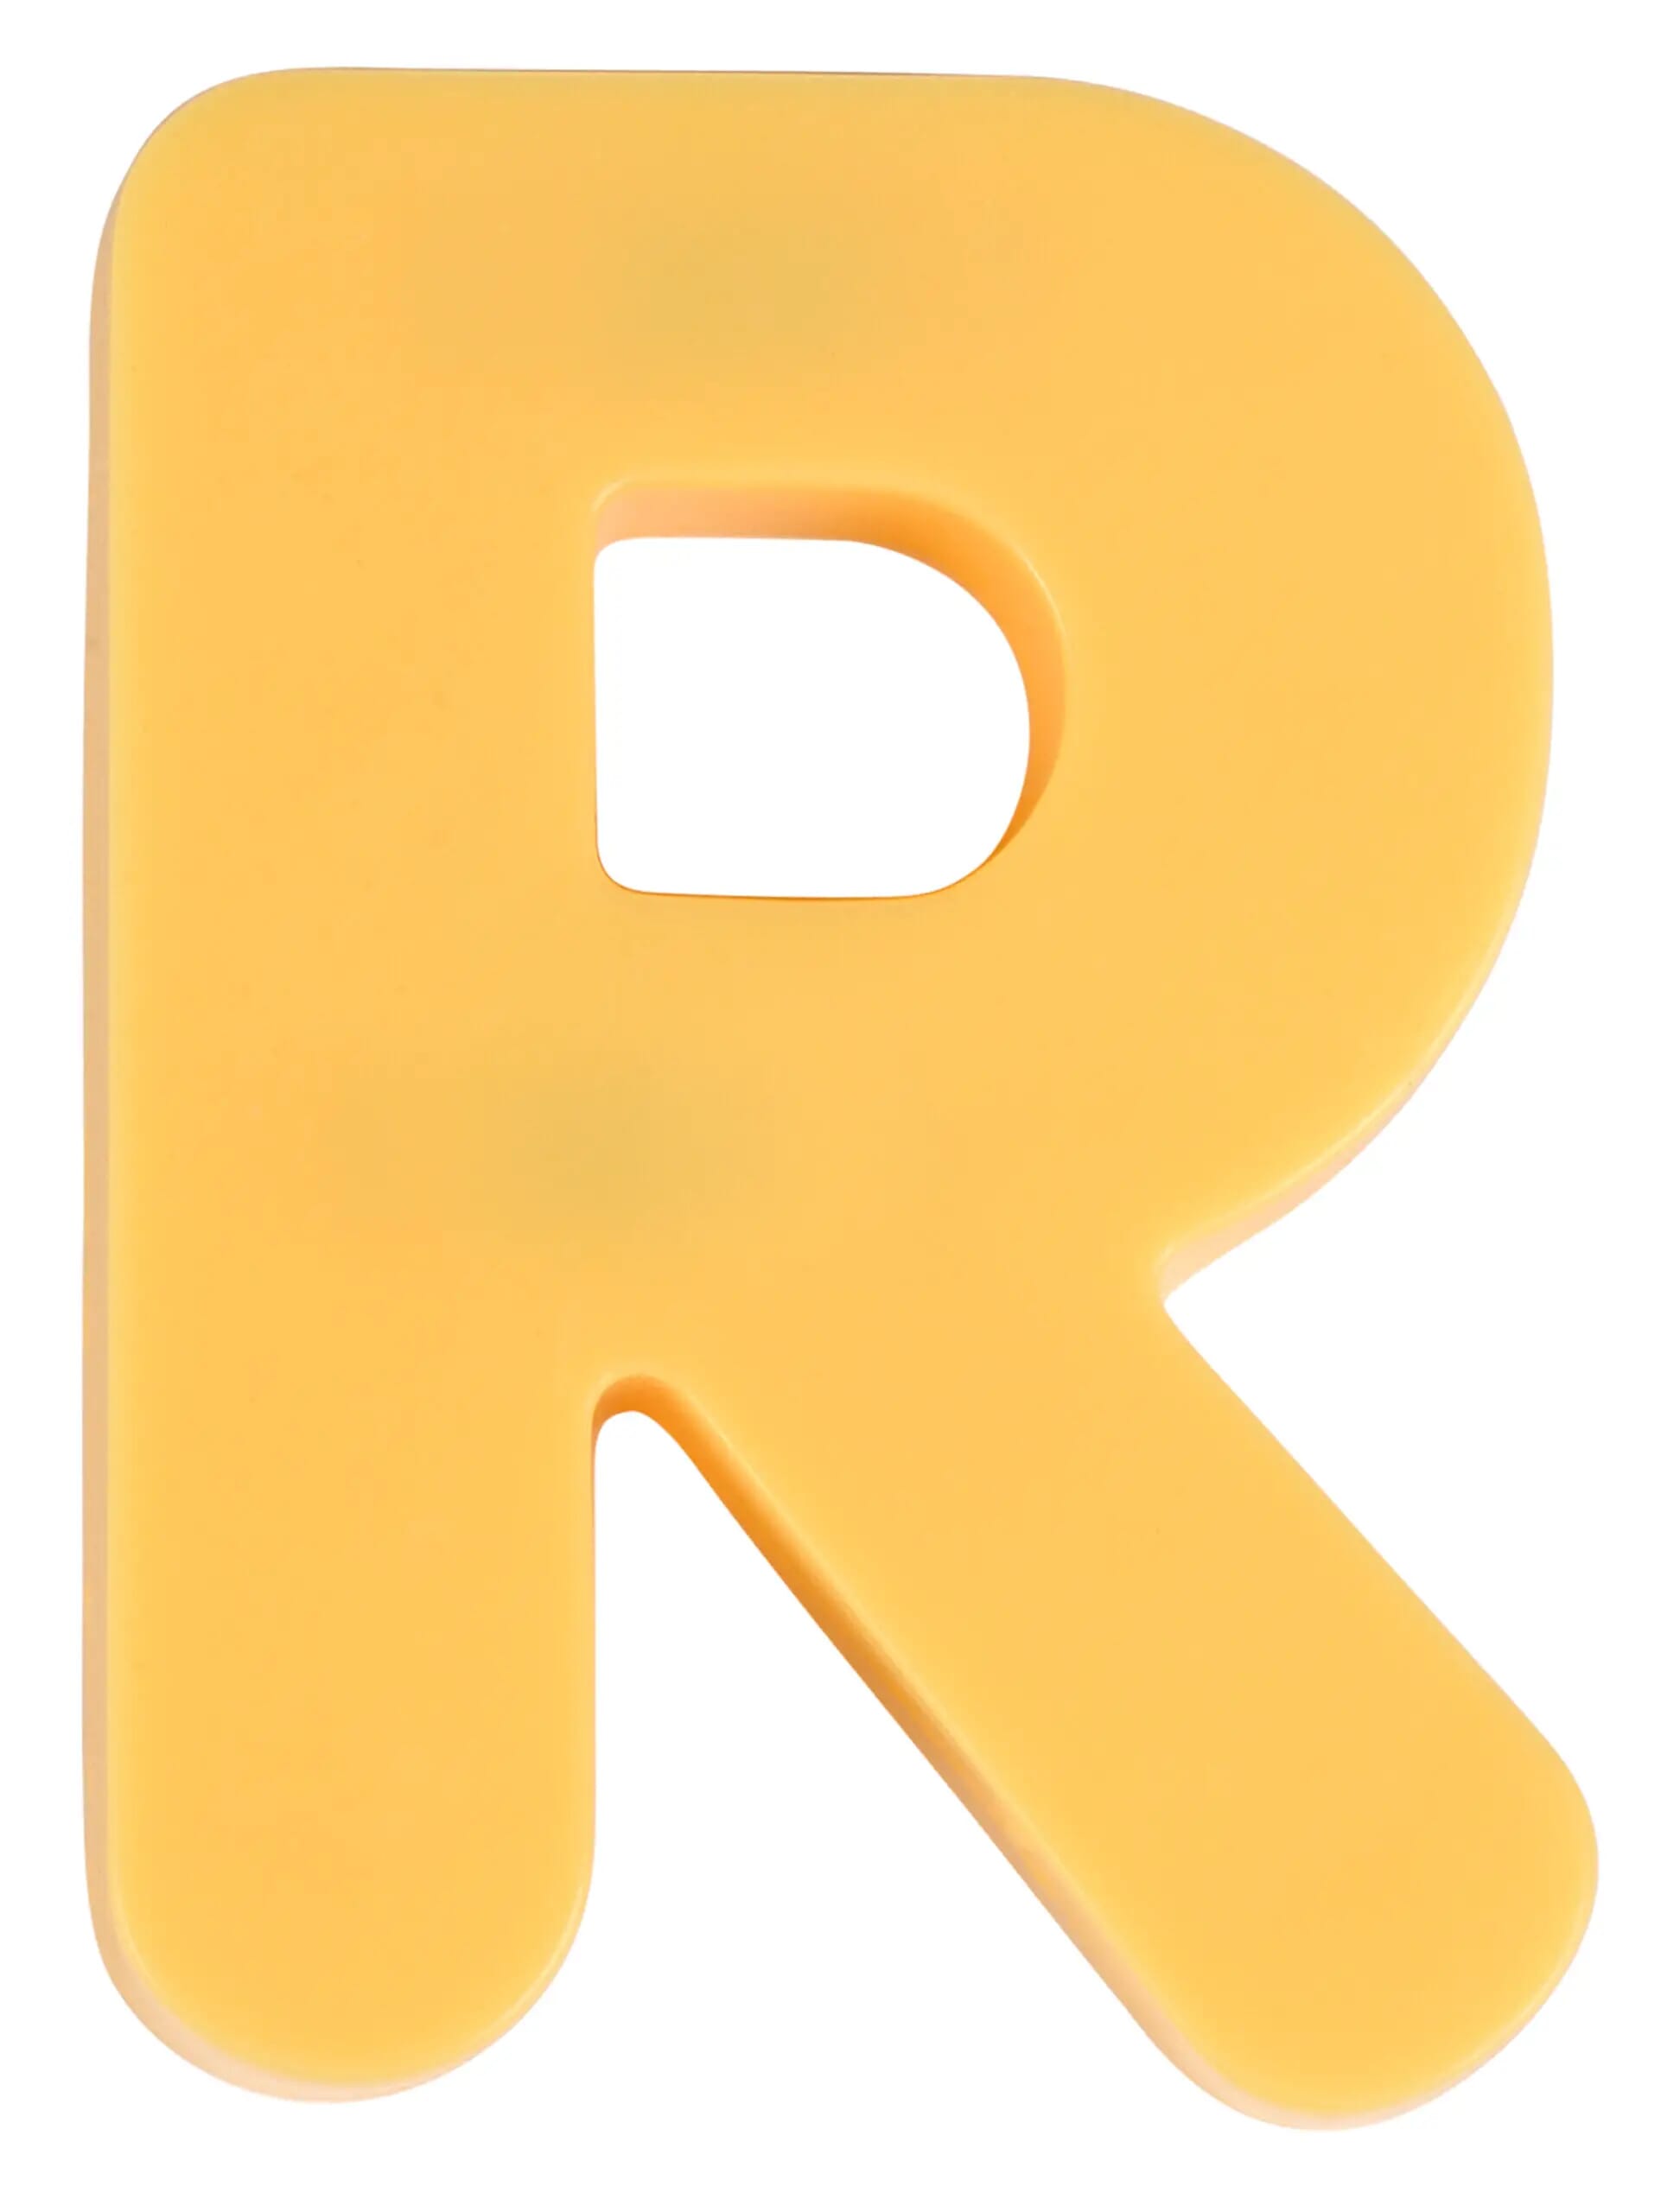 718 Negative Words That Begin With The Letter “R”